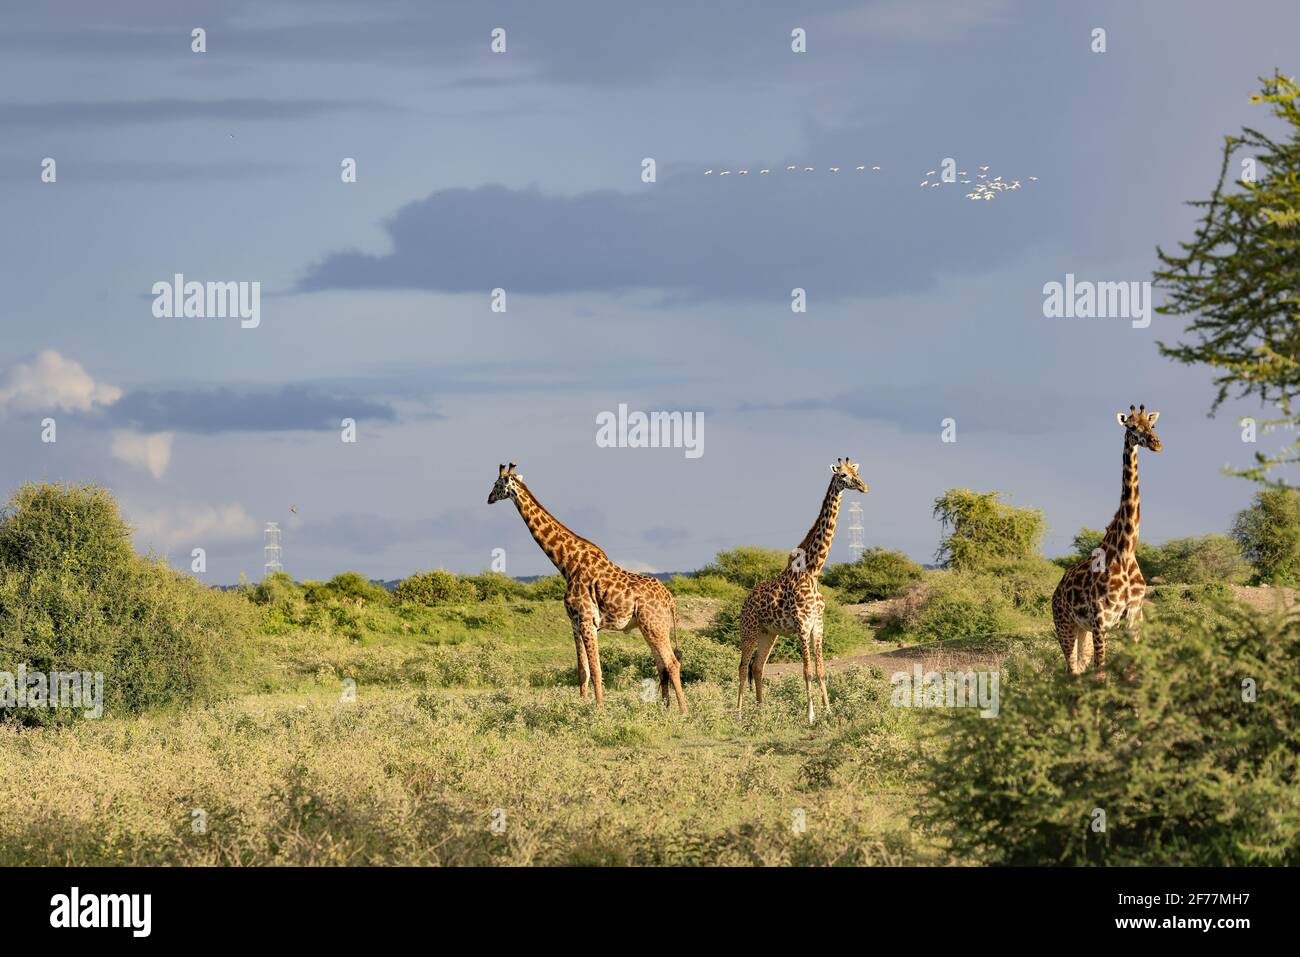 Tanzania, Manyara Ranch, Arusha region, We meet many giraffes in the plain of Manyara Ranch ,, Manyara Conservancy (150 KM2) is a pioneering project combining wildlife protection and sustainable management of tourism for the benefit of local communities Stock Photo